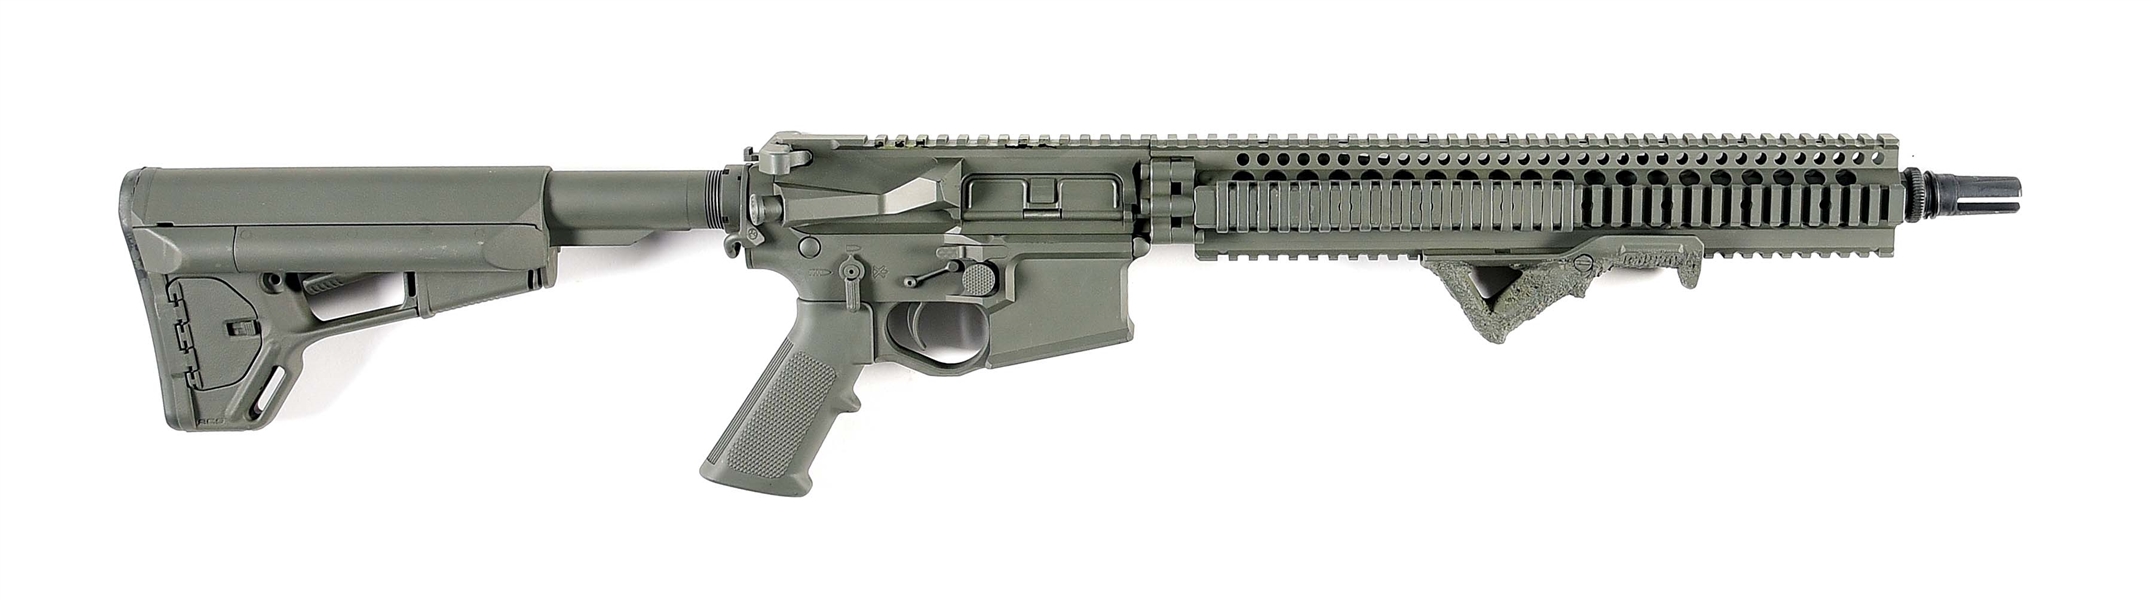 (M) SPIKES TACTICAL ST-15 SEMI-AUTOMATIC RIFLE, CUSTOMIZED BY REICHERT.